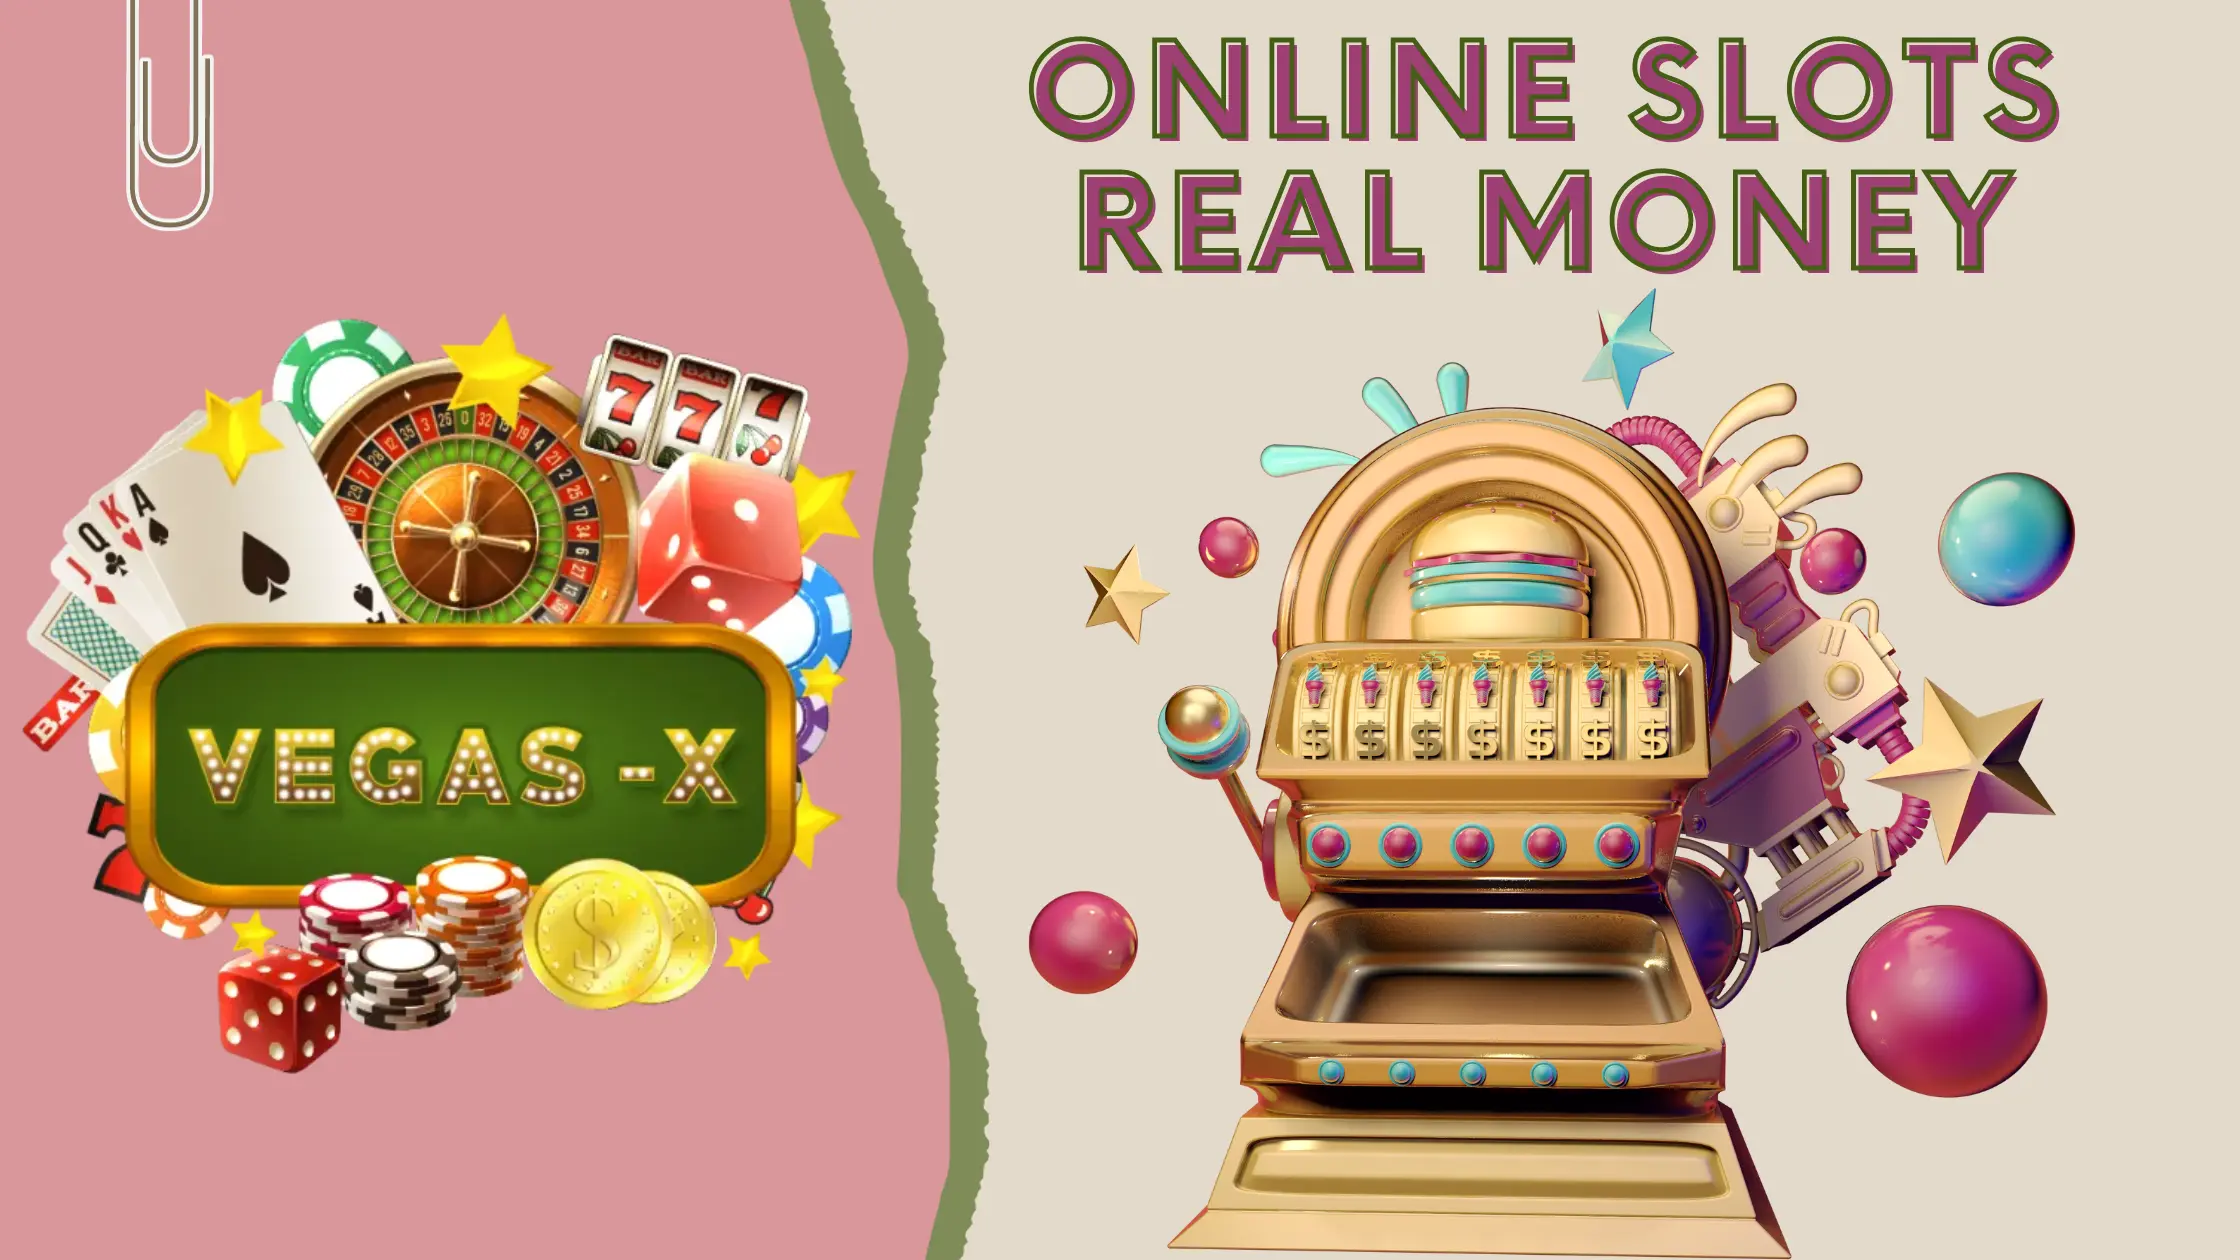 Online slots real money – Play the Best Slots at Vegas X